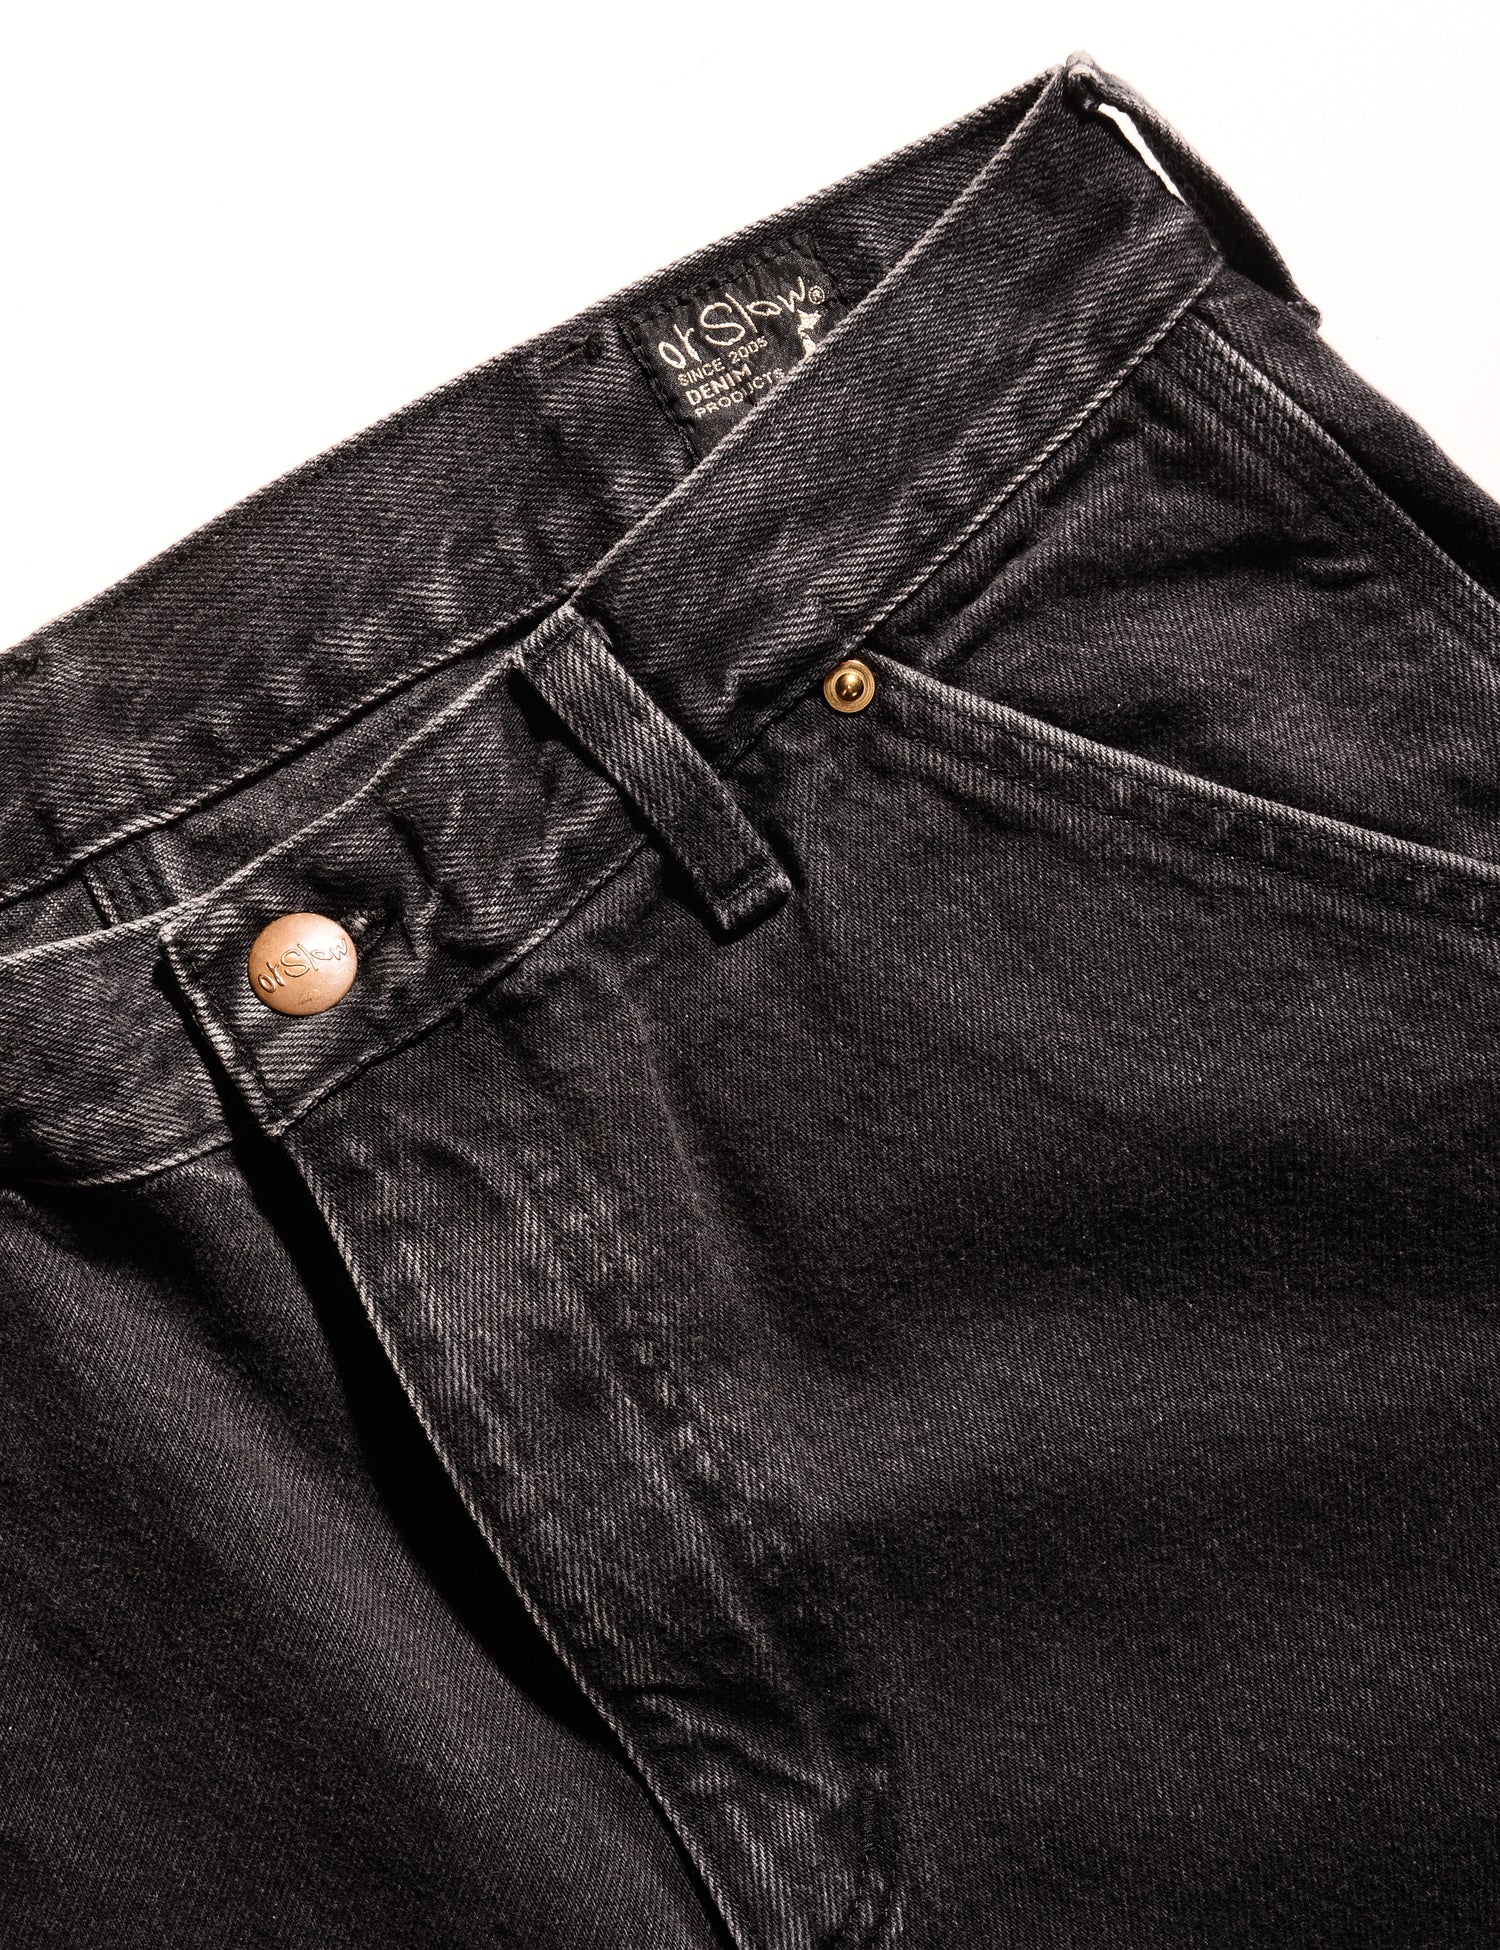 Close-up shot of Orslow Relaxed Fit Painter Pants in Denim - Stonewash Black showing button closure and front pocket